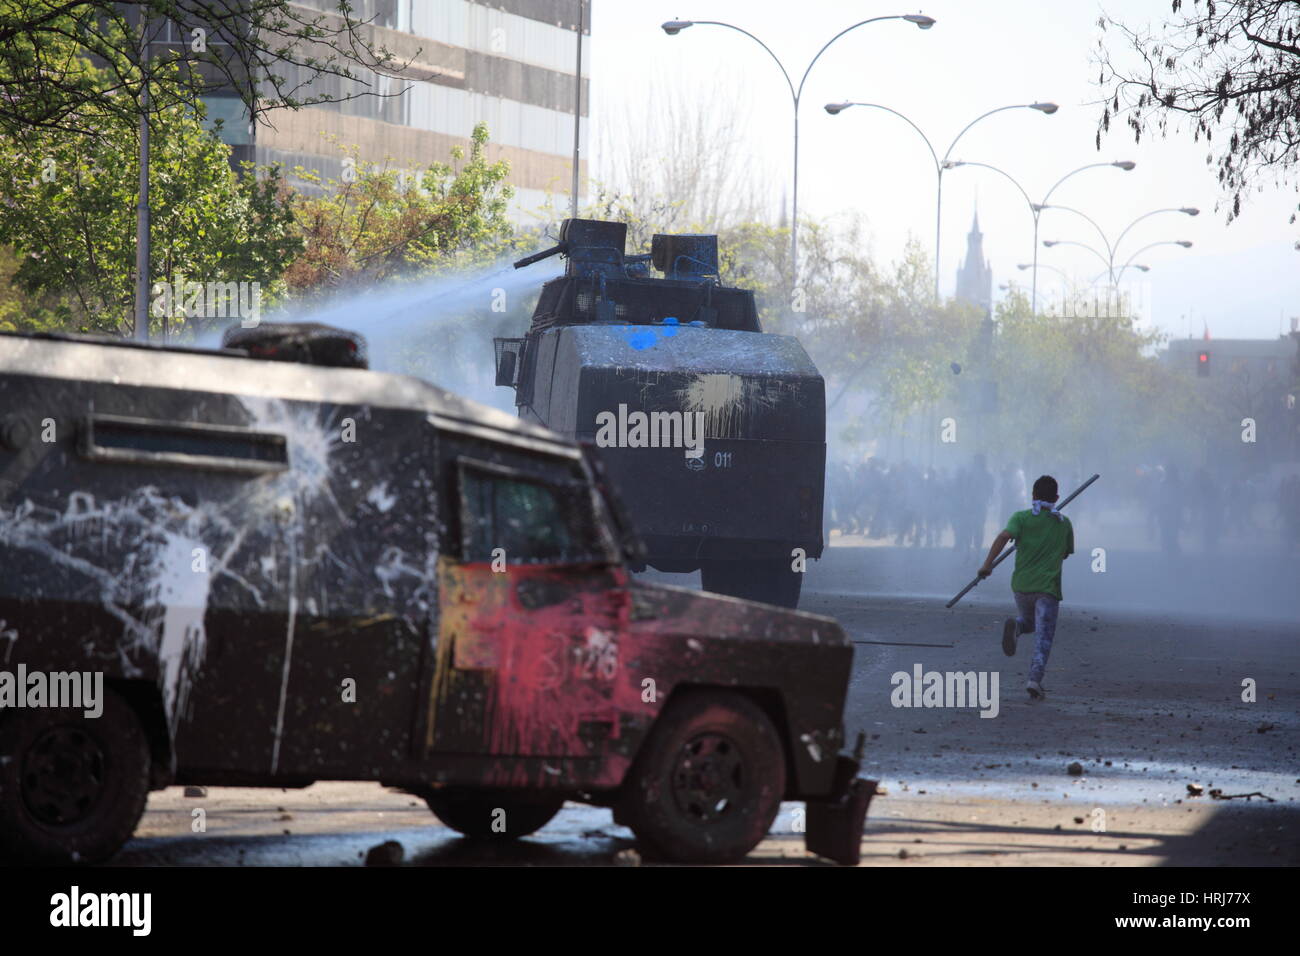 police water cannon disperse protesters,during a student strike in Santiago's Downtown, Chile. Stock Photo